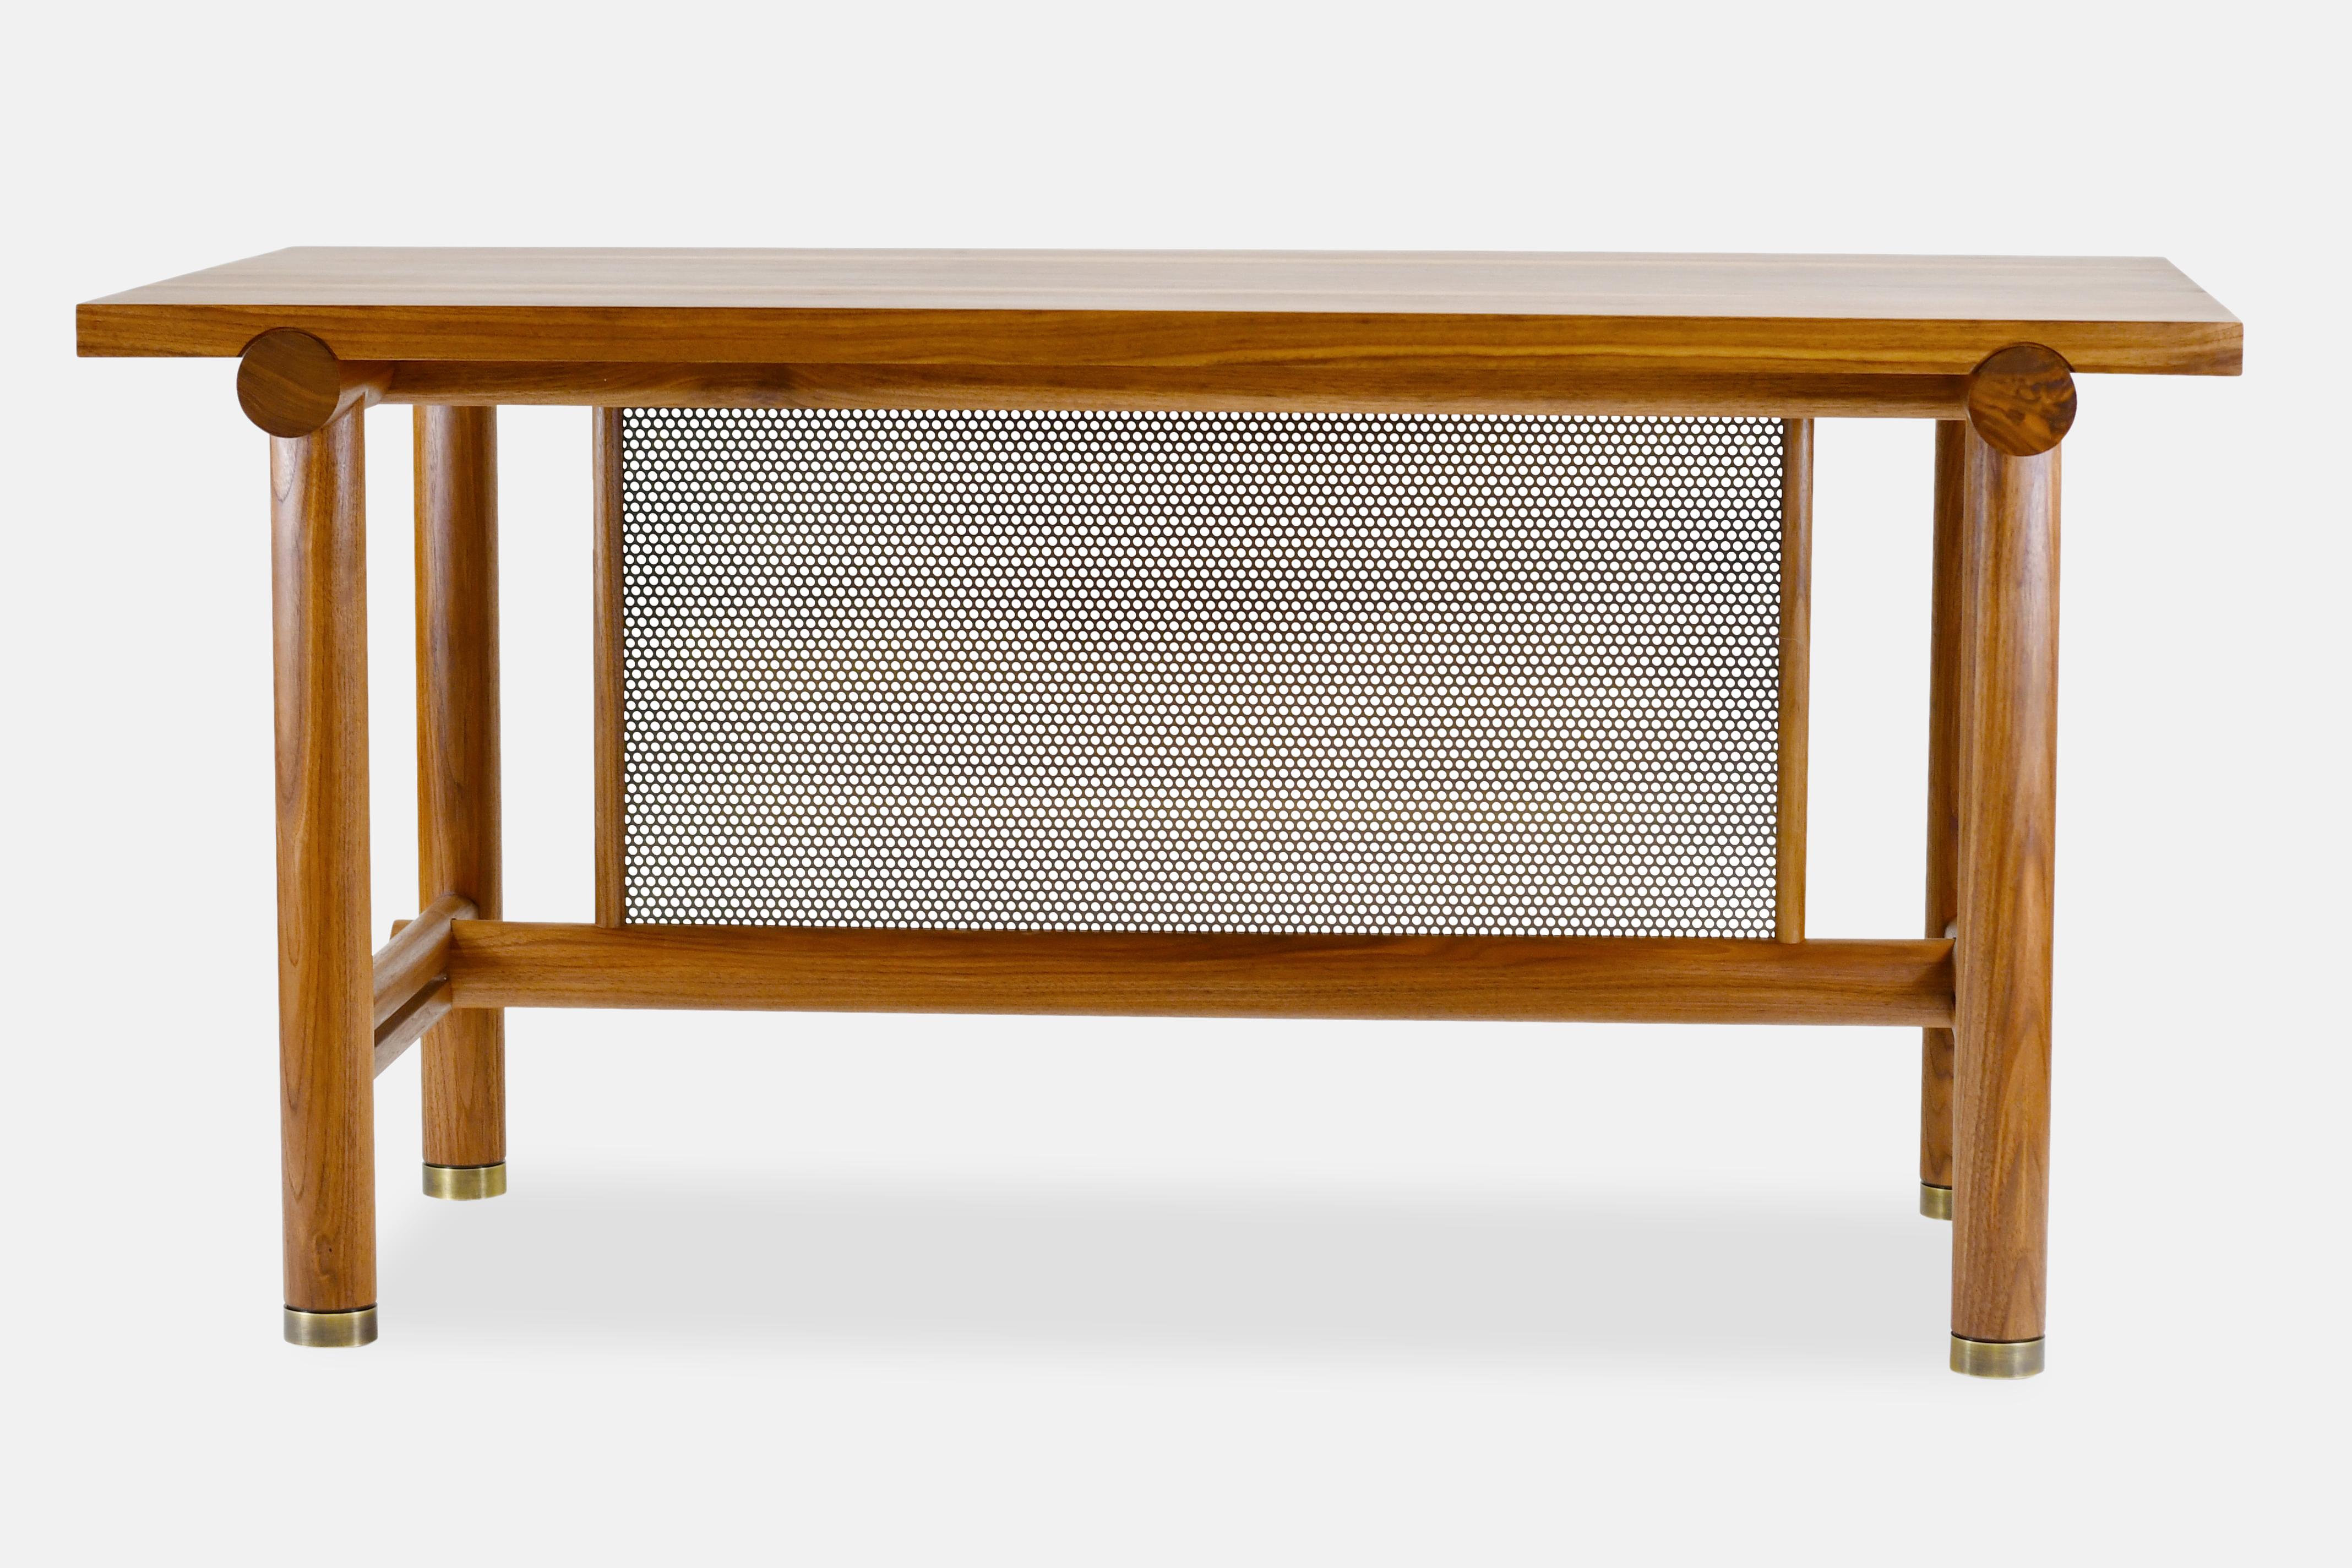 The Silas Desk is crafted in solid hardwood with steel and brass accents. Inspired by the classic work bench, this desk focuses on a work surface from a simpler time. 

Handcrafted with interlocking round posts, a perforated modesty panel and plated